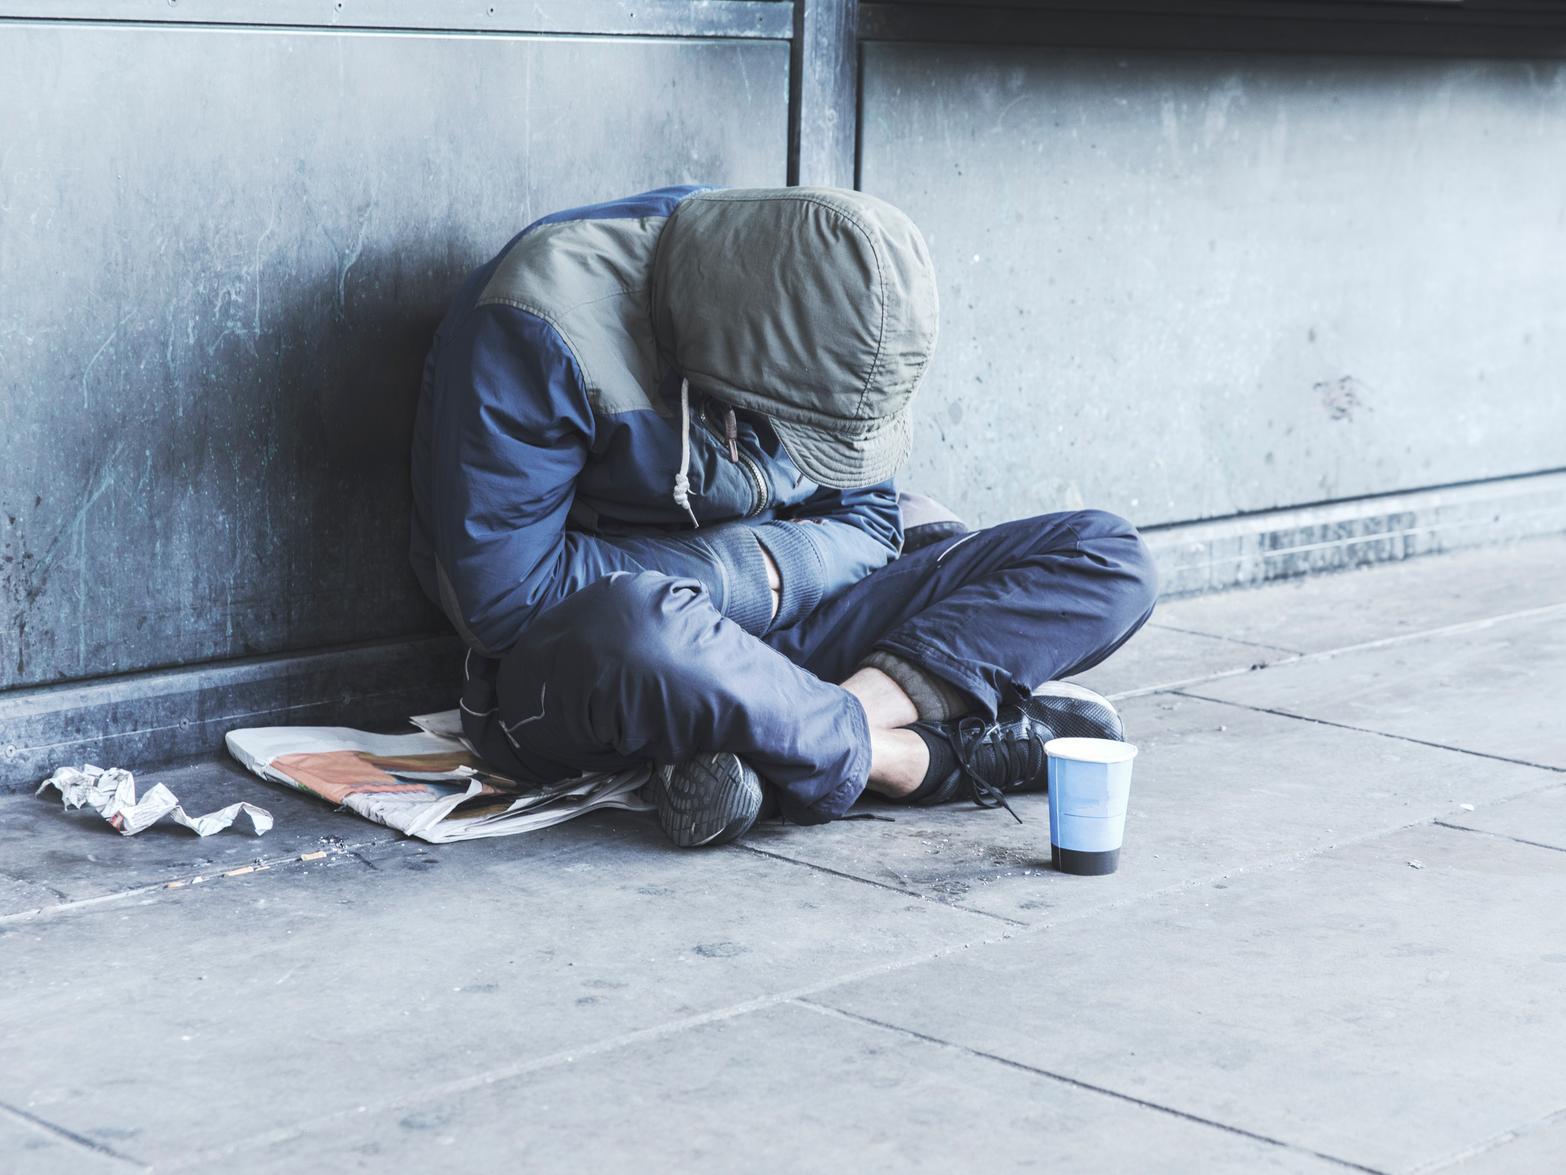 If youd like to support the homeless over Christmas, consider donating your time or money to Crisis at Christmas, who help keep the homeless safe and warm during the cold season.